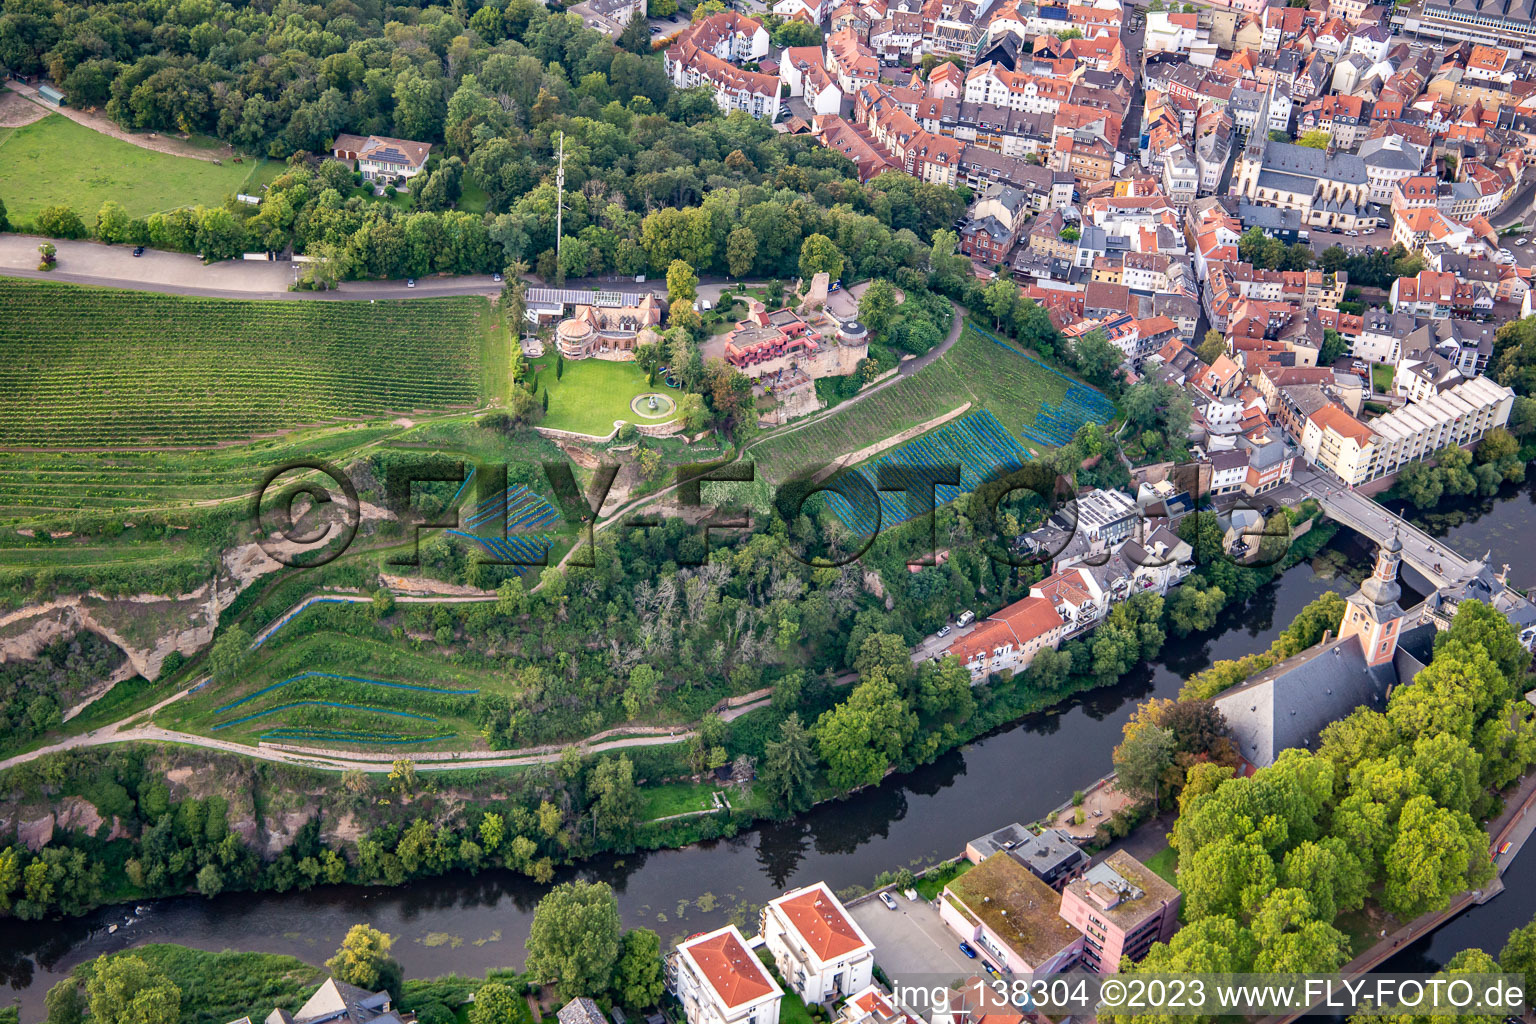 Aerial view of Kauzenburg by Mike's Catering on the Kauzenberg in Bad Kreuznach in the state Rhineland-Palatinate, Germany